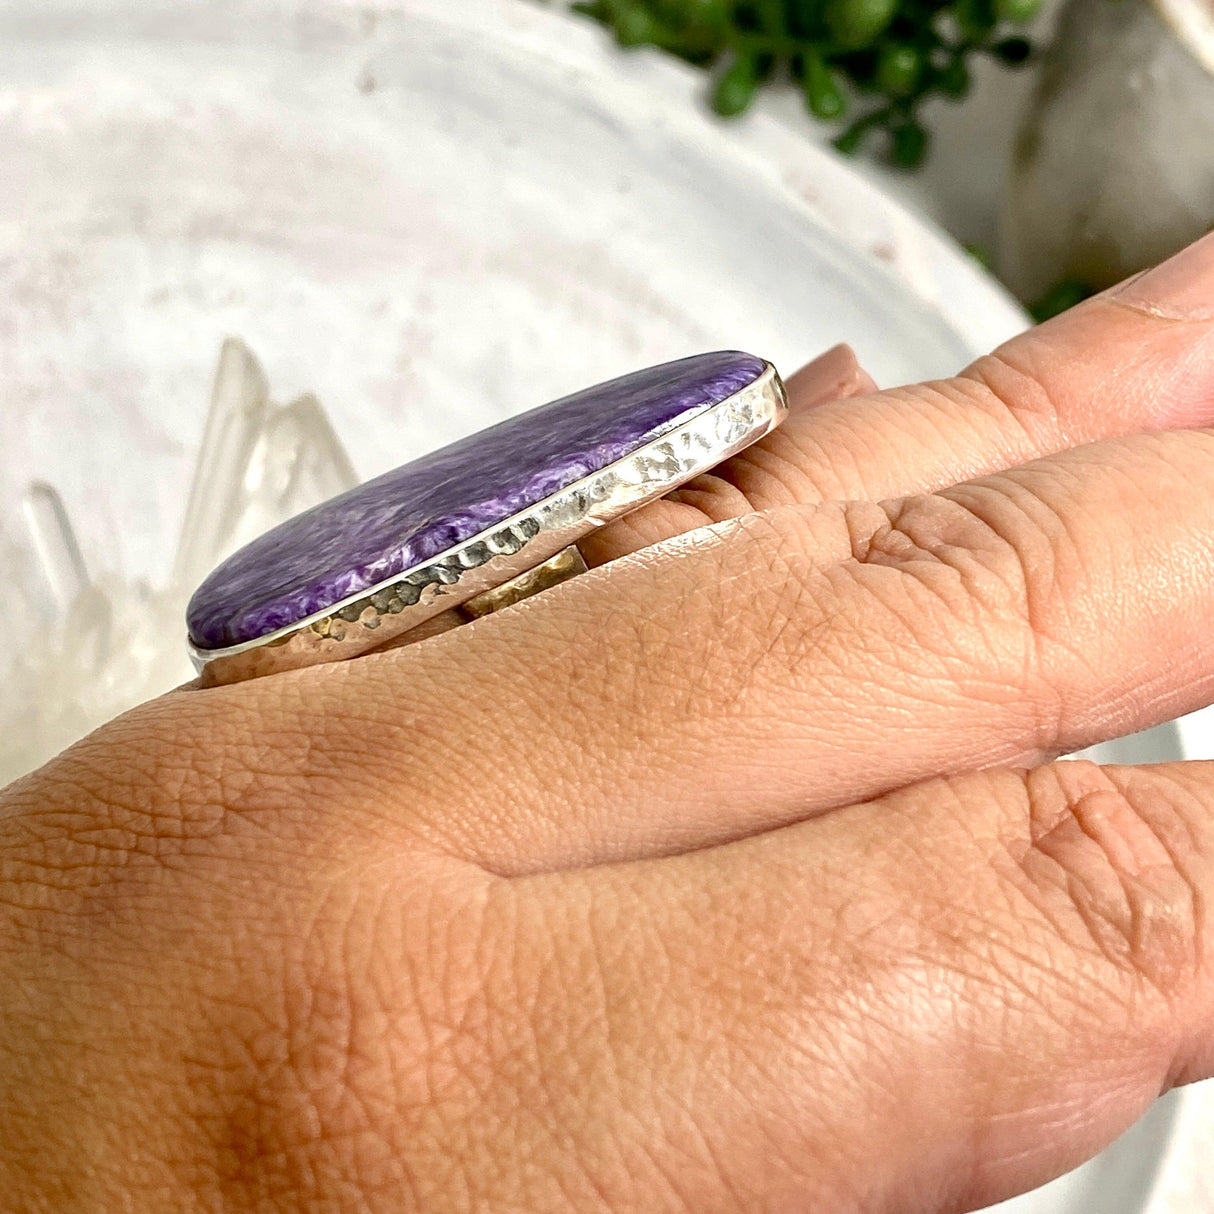 Charoite Free form Ring with Beaten Band s.10.5 KRGJ644 - Nature's Magick